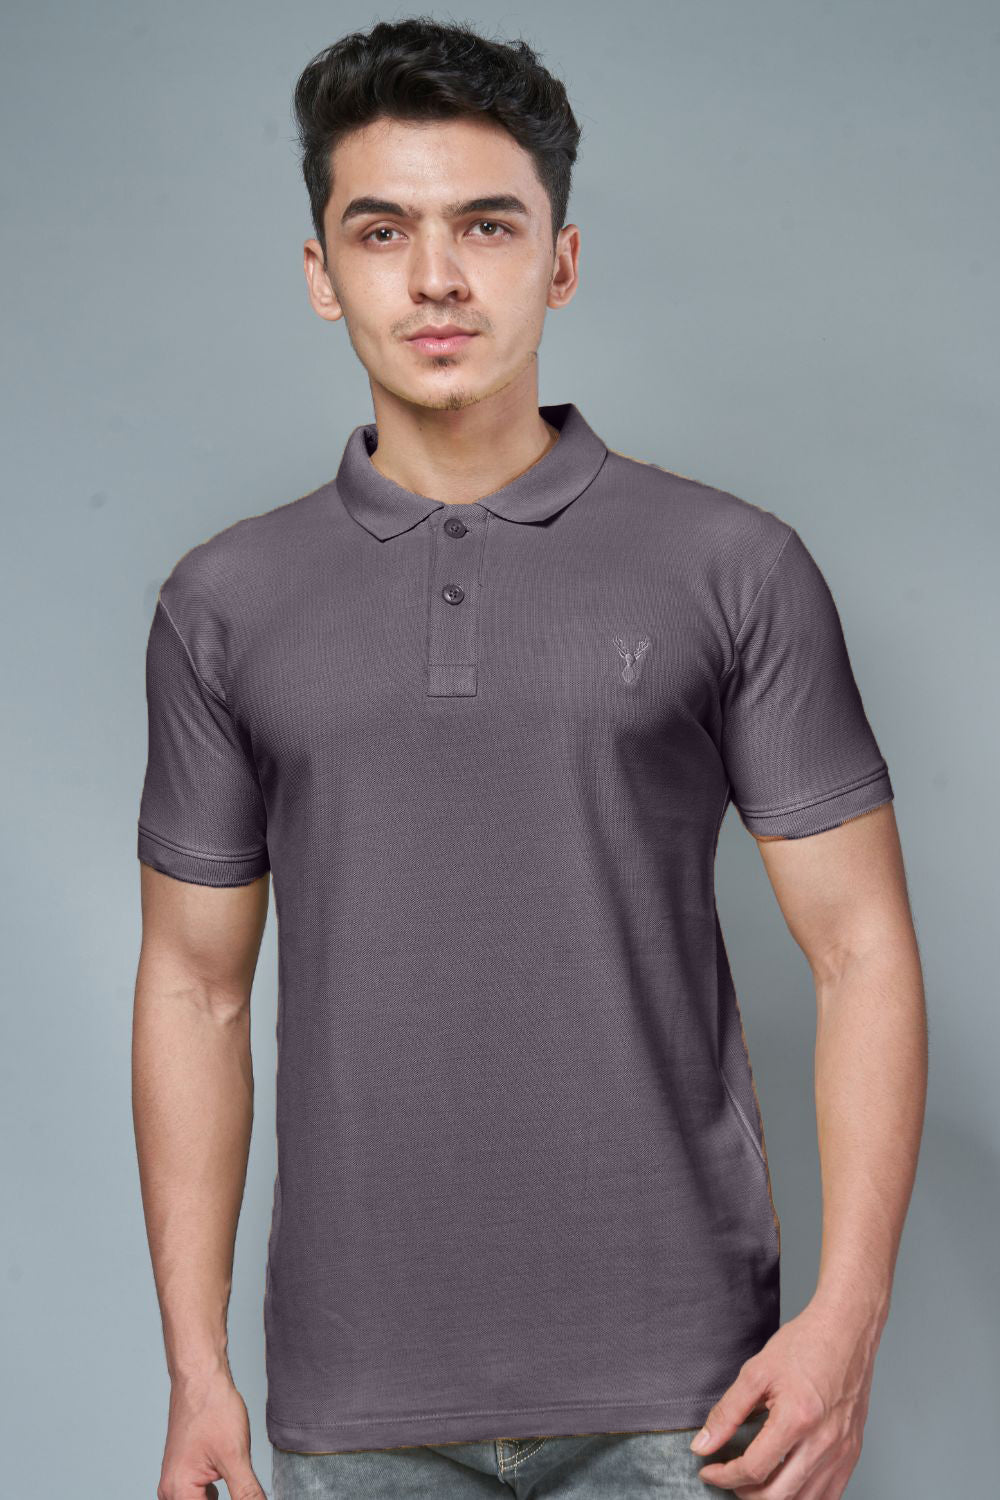 Grape colored, identity Polo T-shirts for men with collar and half sleeves, front view.